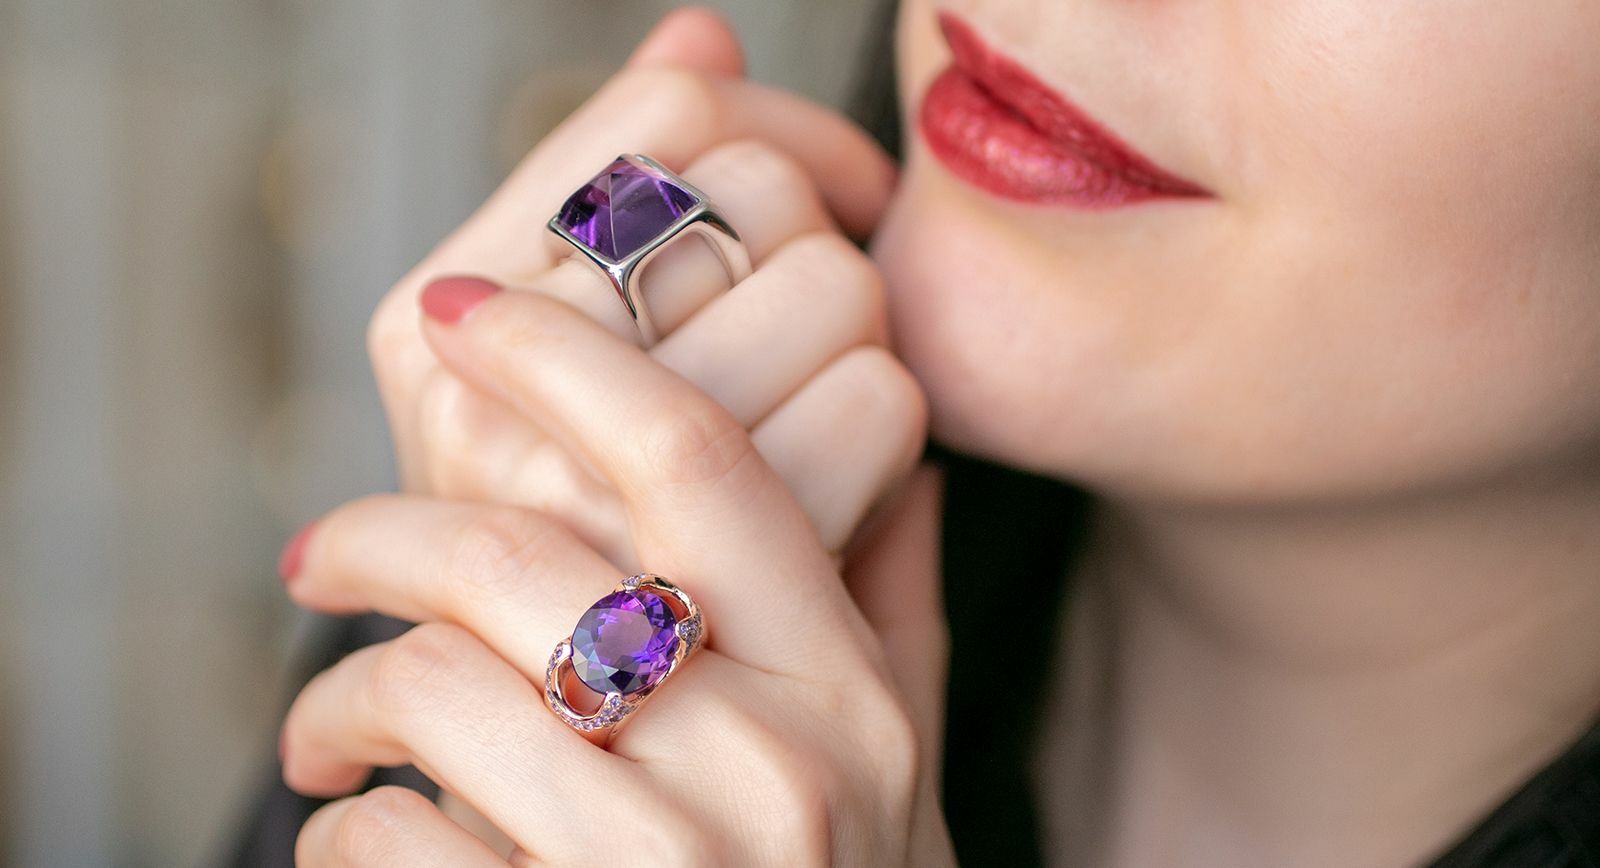 Katerina Perez wears amethyst rings in the spirit of the February birthstone 